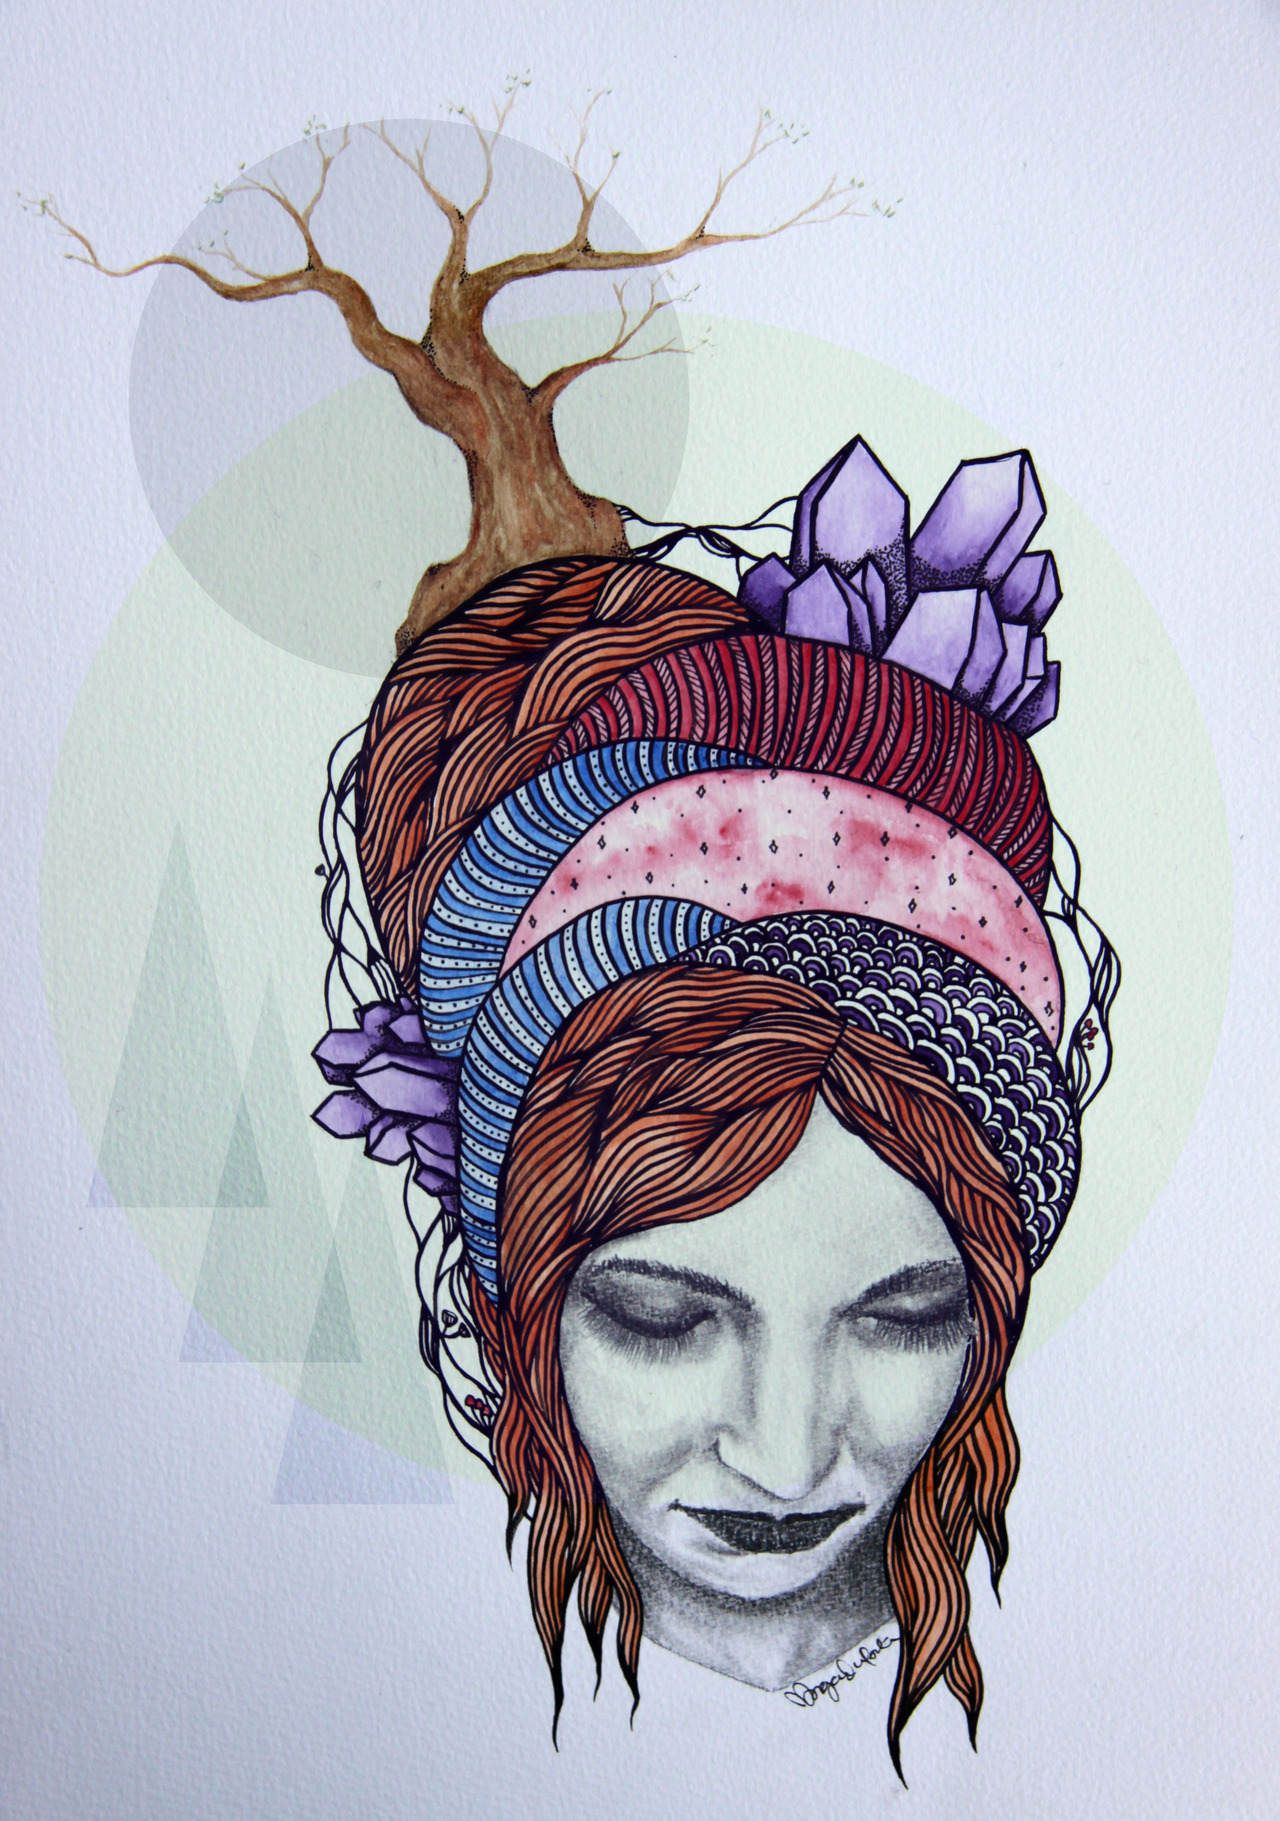 Mixed media illustration by Morgan Linforth, click through link takes you to my blog :)